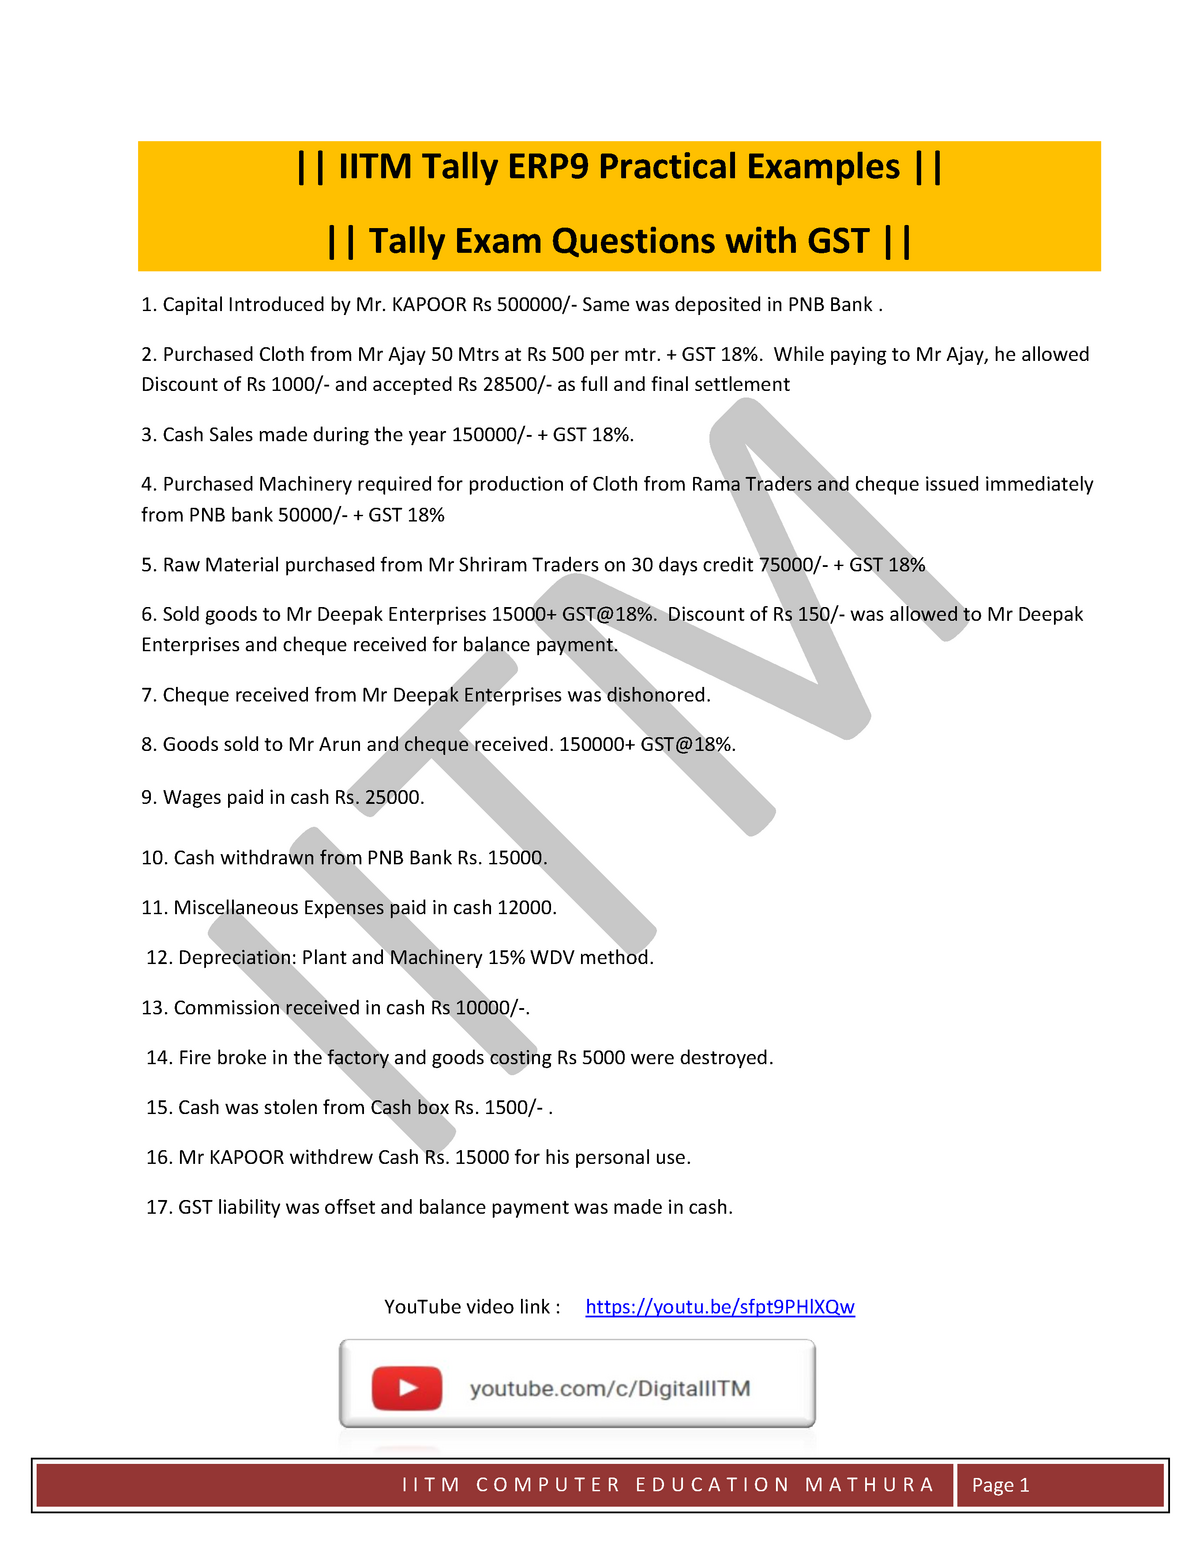 tally practical assignment free download